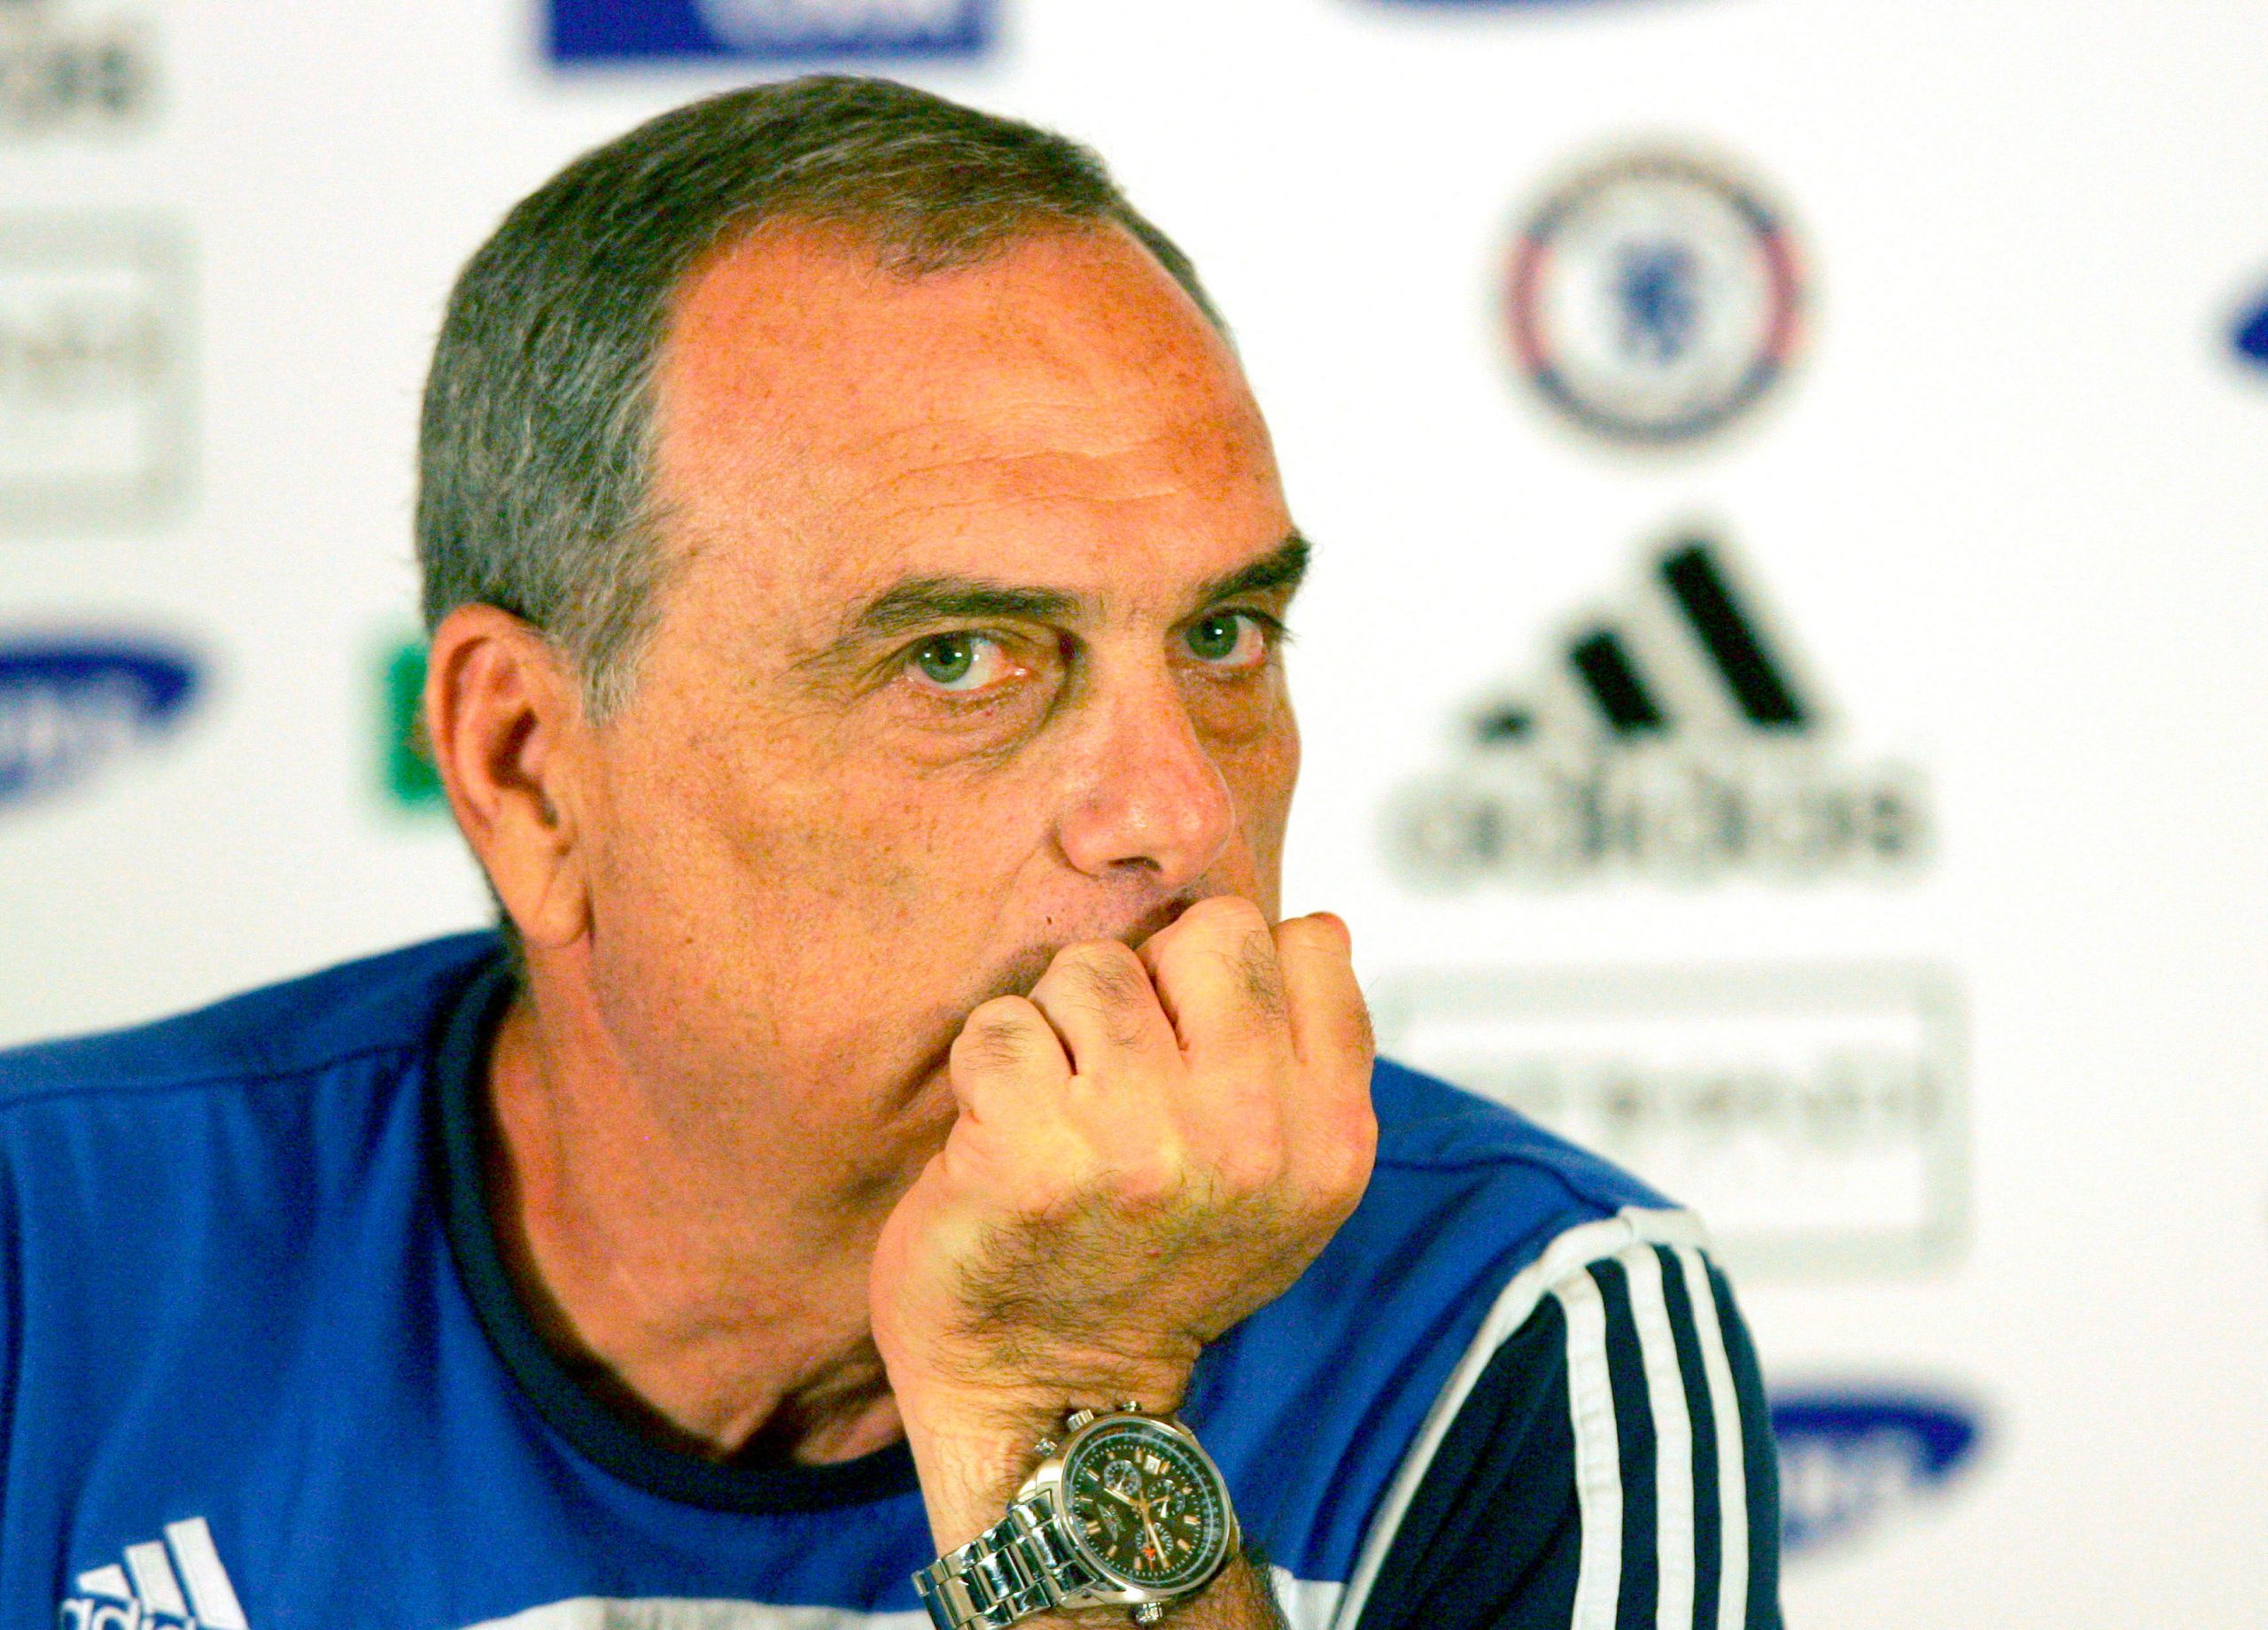 Avram Grant, former Chelsea manager, accused of sexual harassment